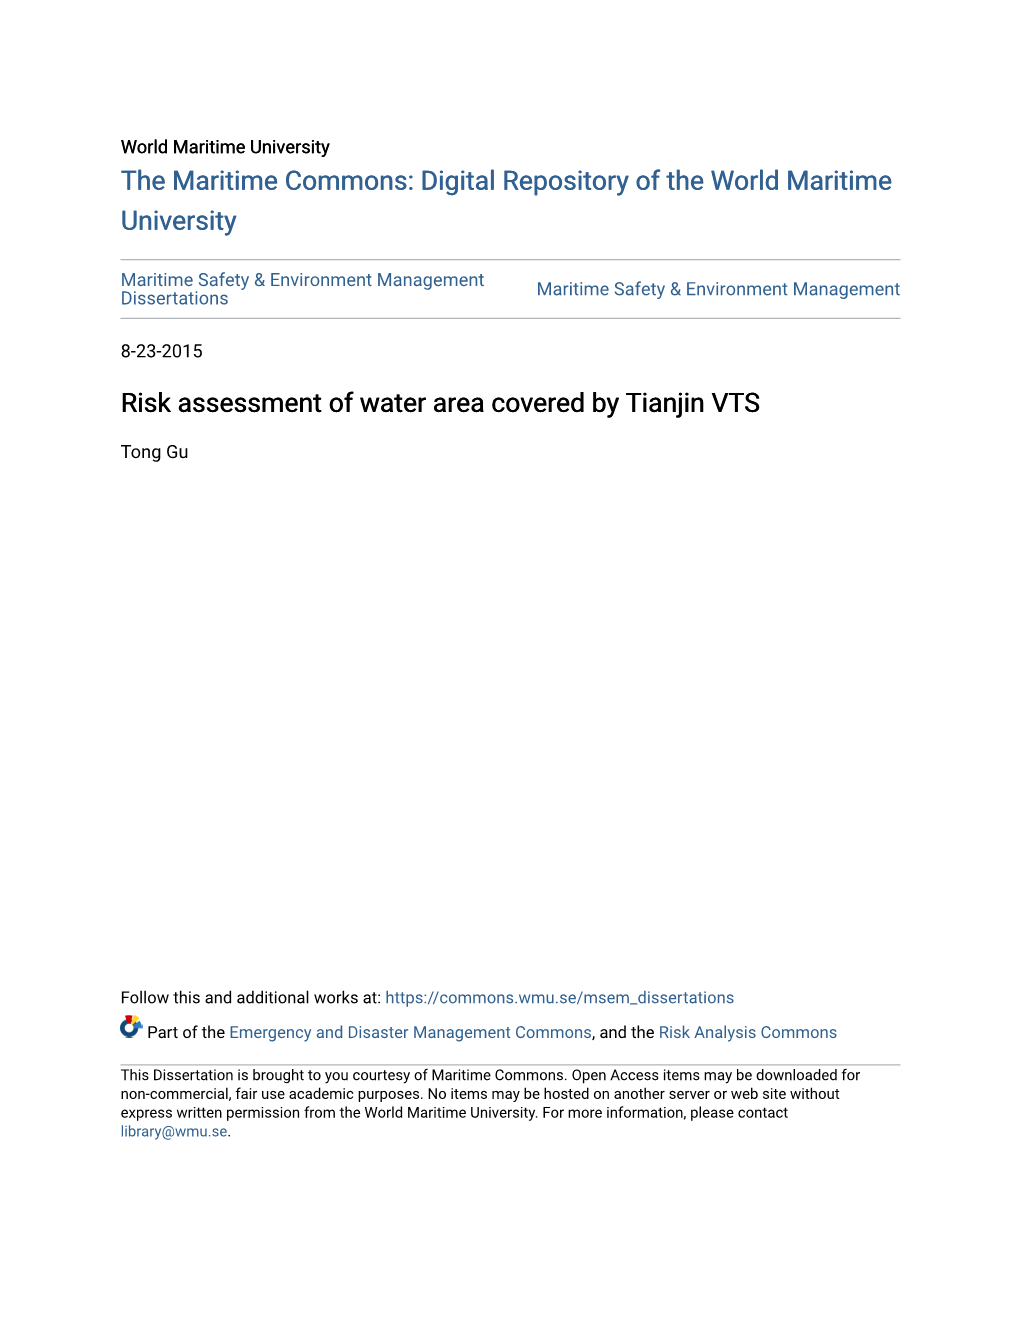 Risk Assessment of Water Area Covered by Tianjin VTS